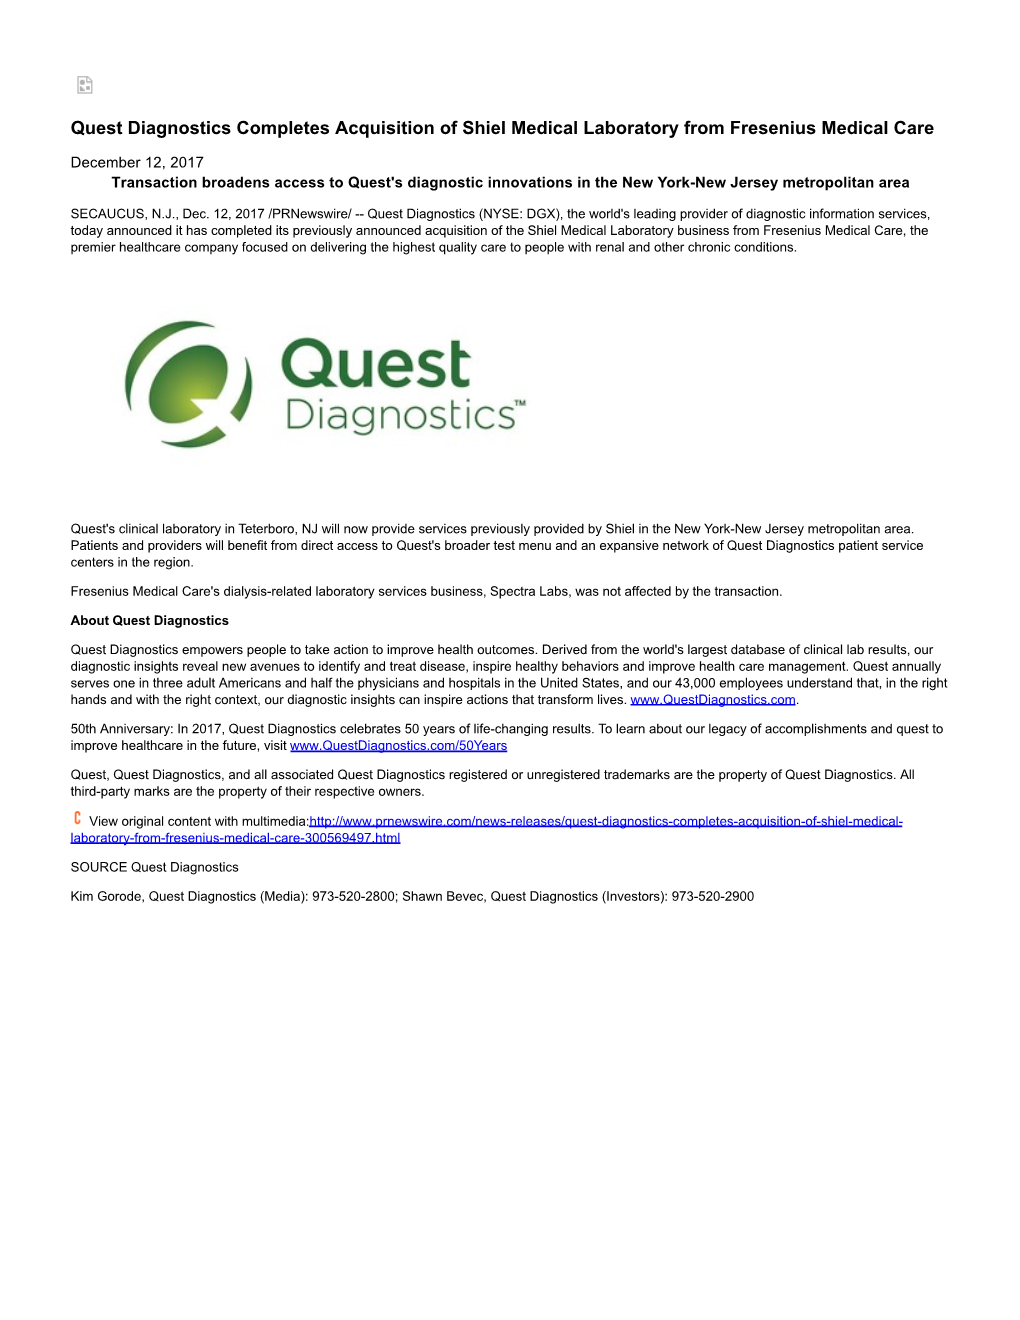 Quest Diagnostics Completes Acquisition of Shiel Medical Laboratory from Fresenius Medical Care